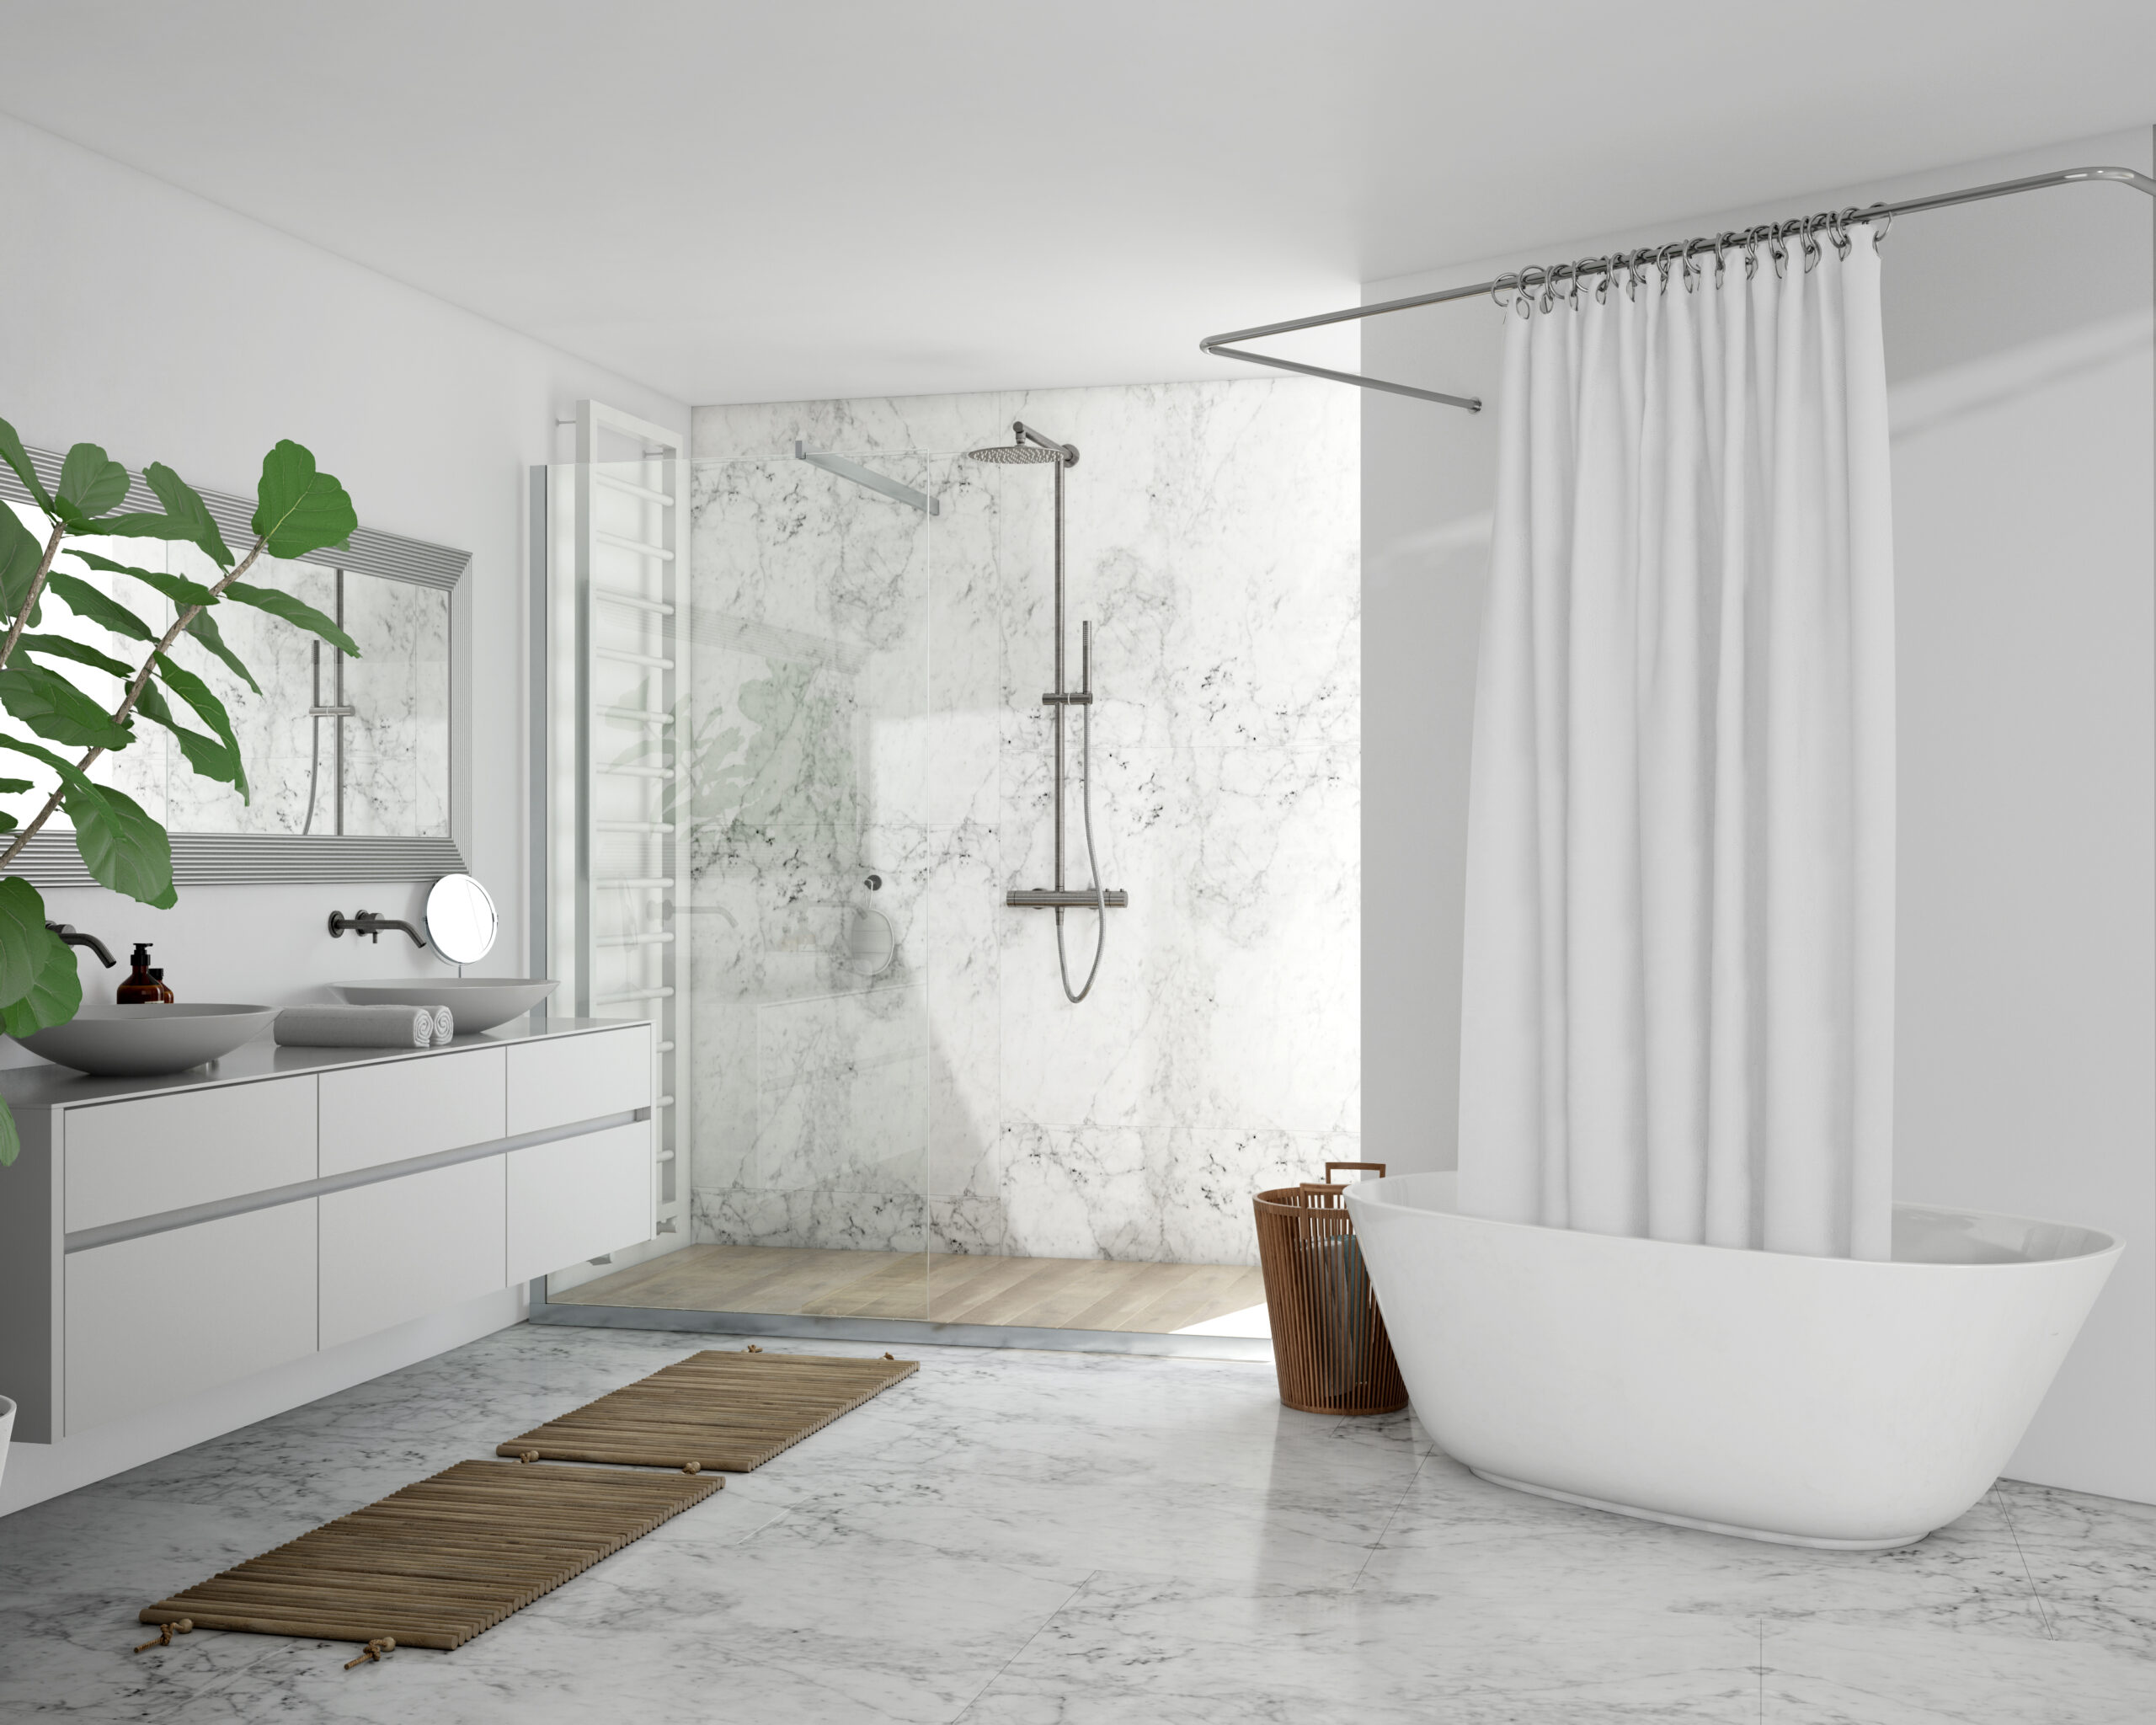 Free PSD bathtub with curtain, cupboard and shower